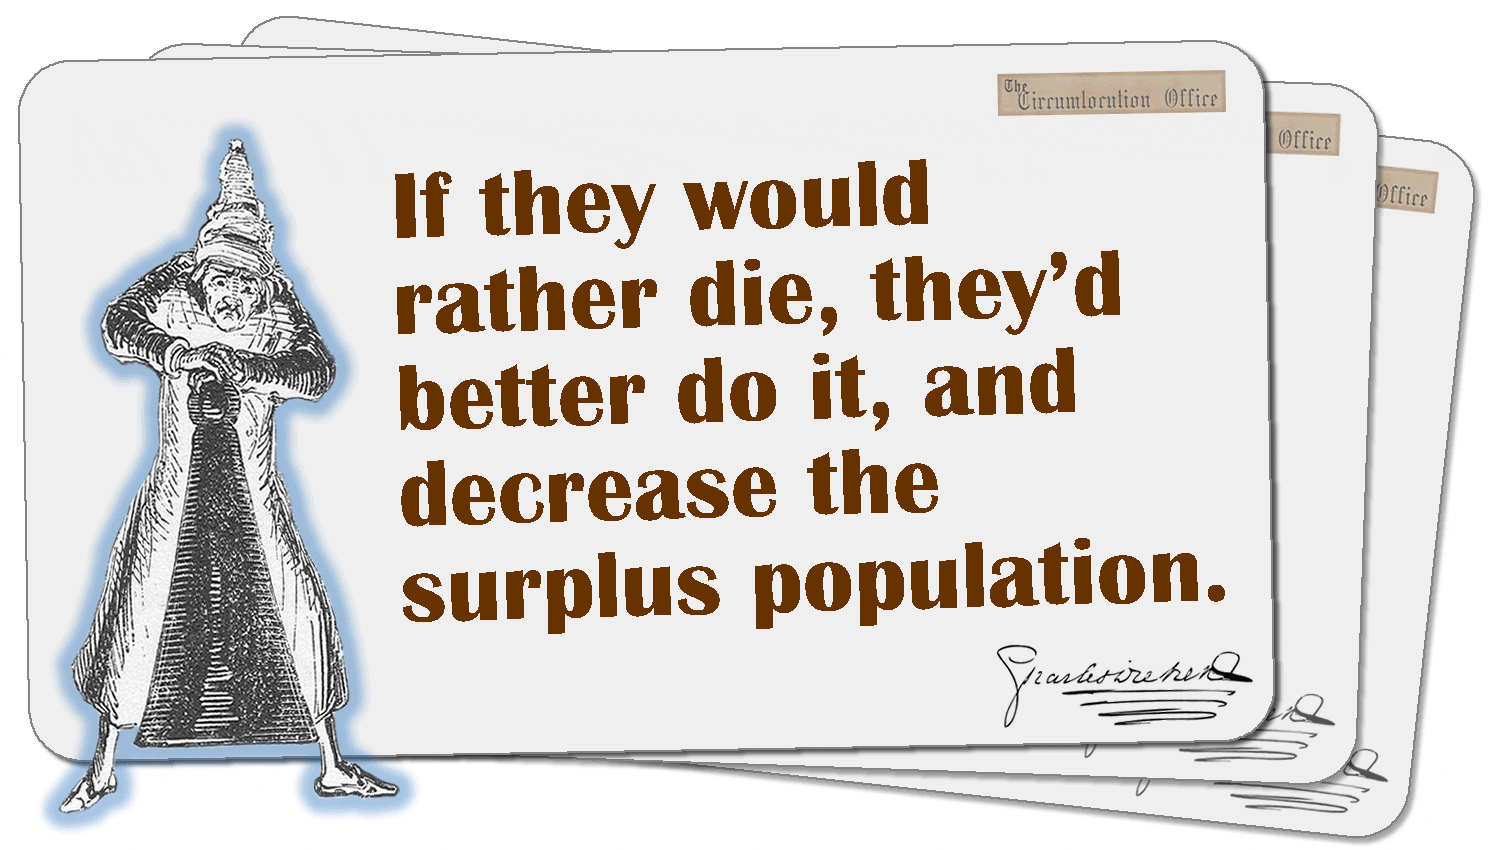 If they would rather die, they’d better do it, and decrease the surplus population.